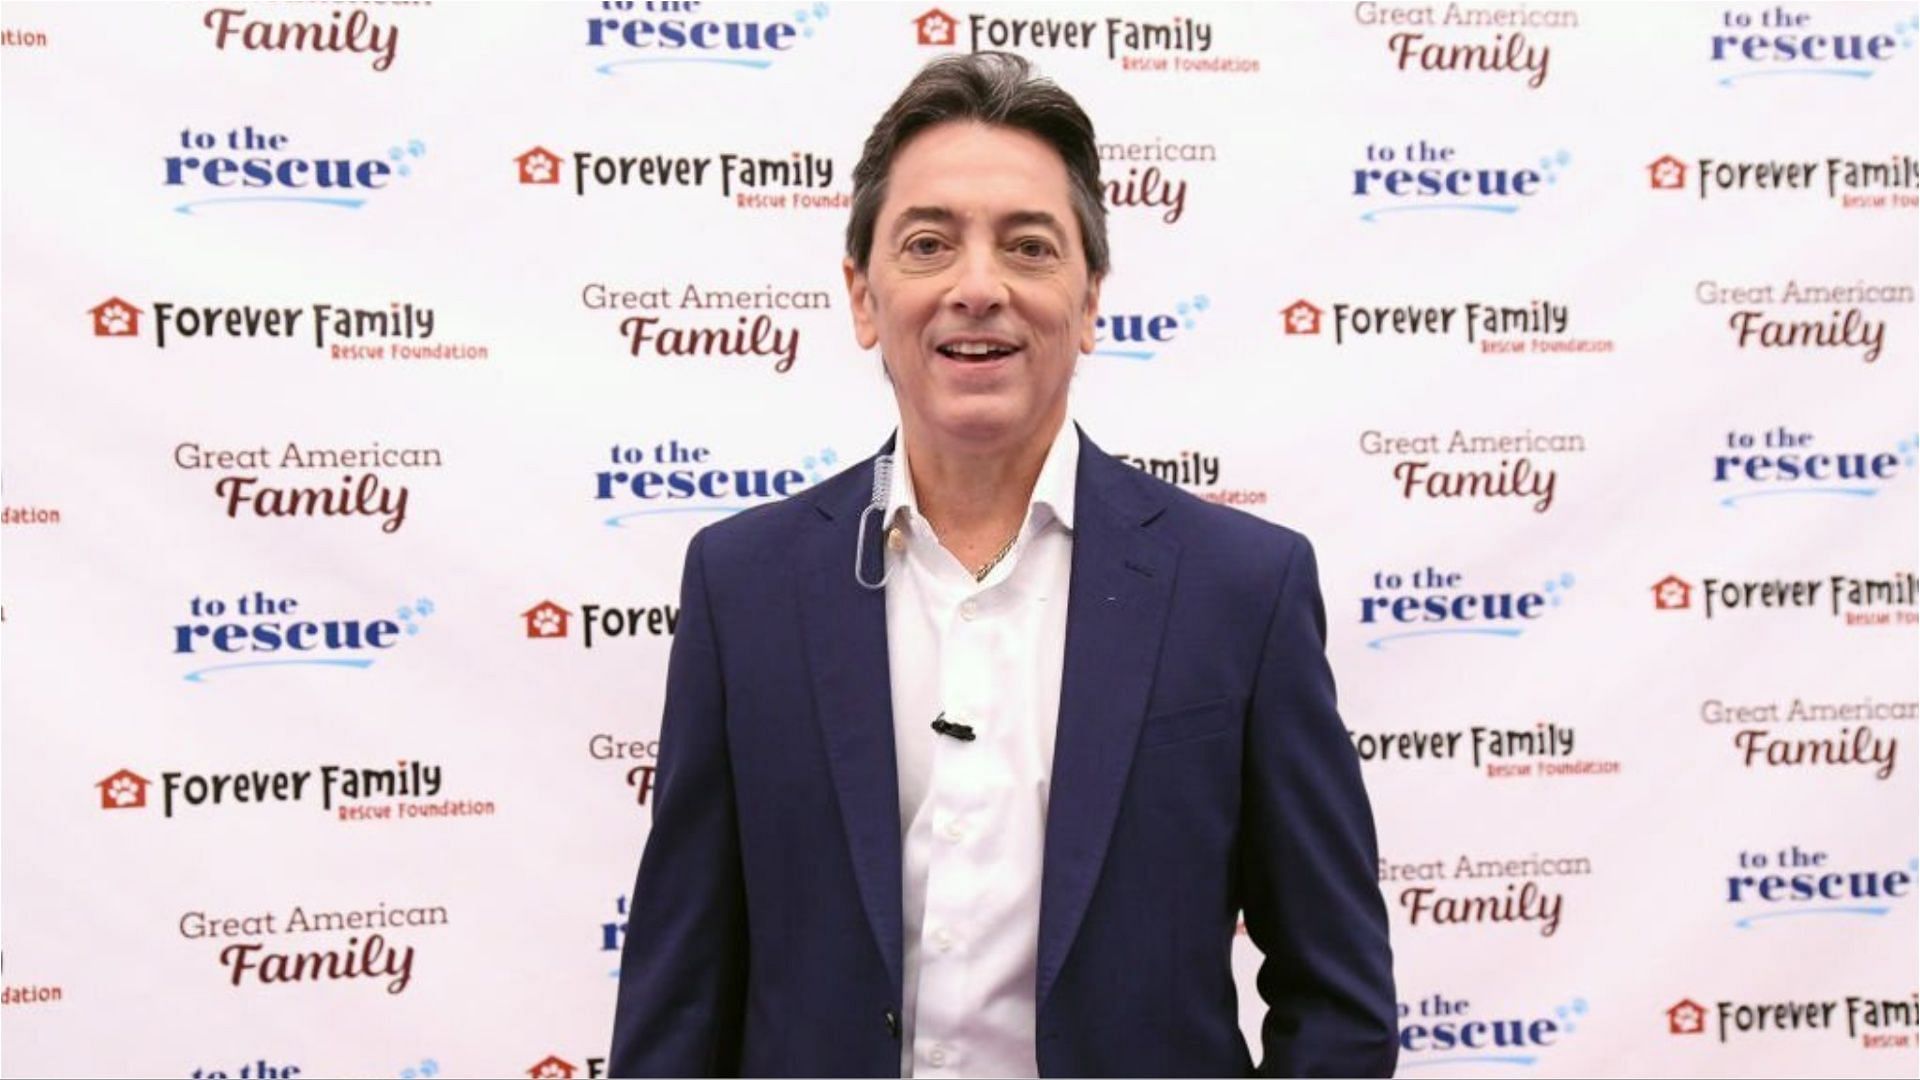 Scott Baio has moved to Florida (Image via Michael Tullberg/Getty Images)